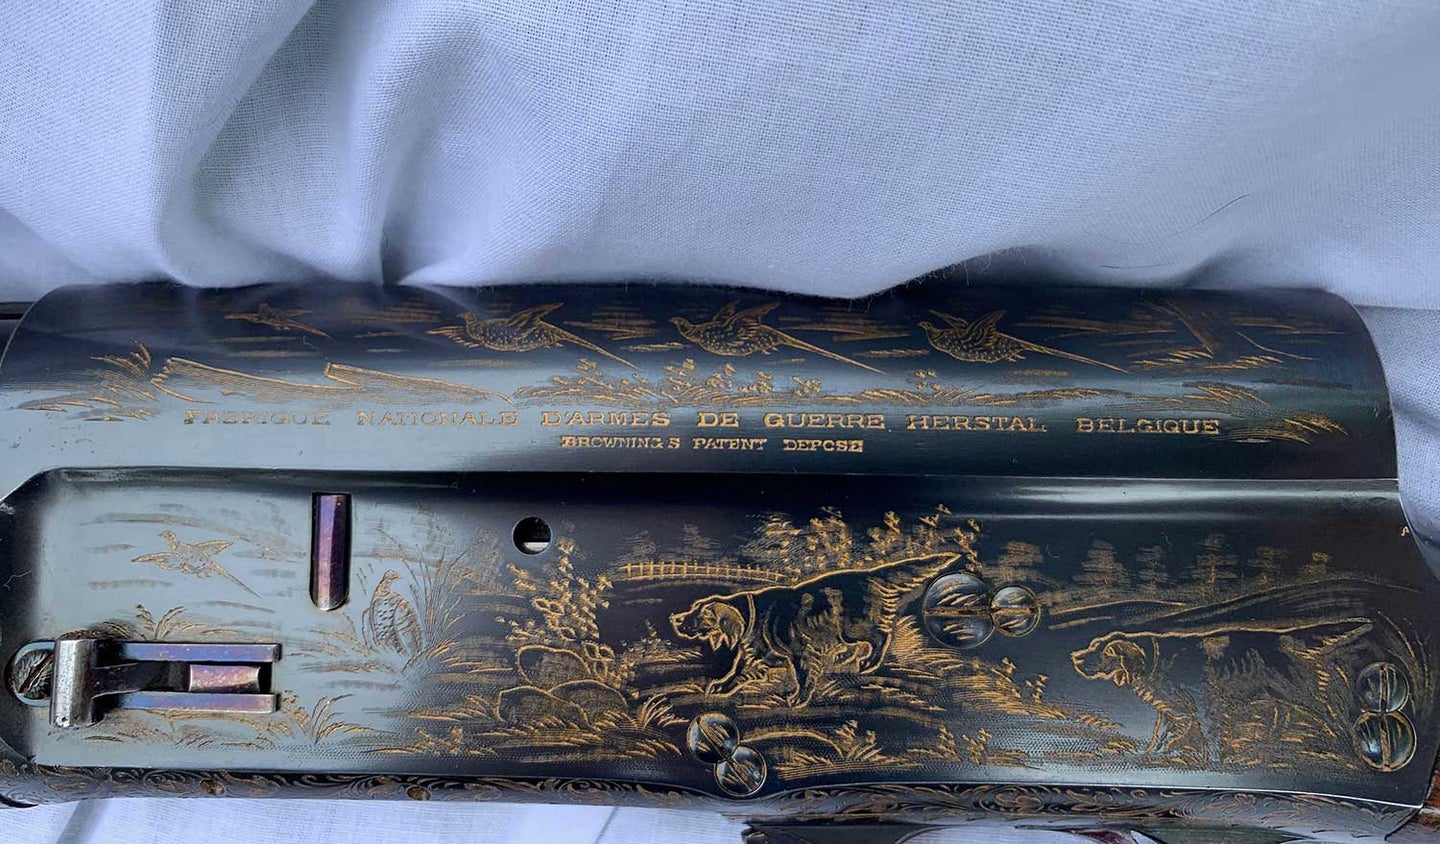 Detail of engraving on Browning Auto 5